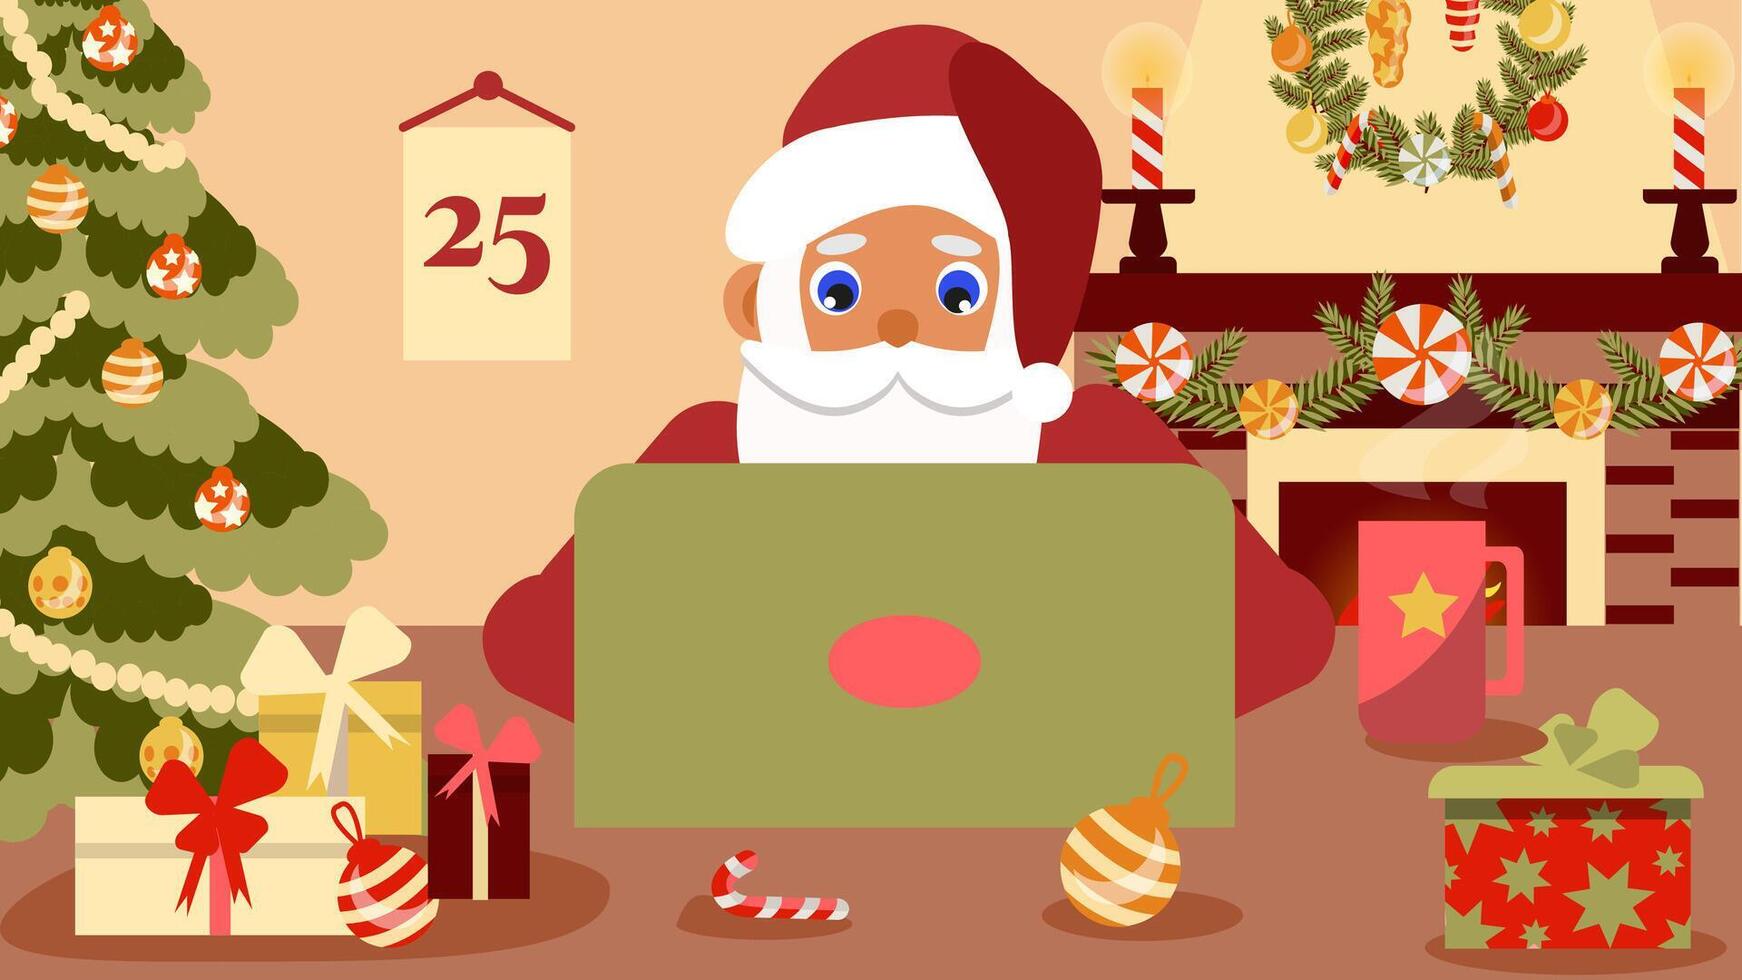 Santa Claus is sitting at a table with a laptop and a Christmas tree with gifts, in a cozy room with a fireplace, a festive Christmas illustration in a flat style, a greeting card for winter holidays. vector